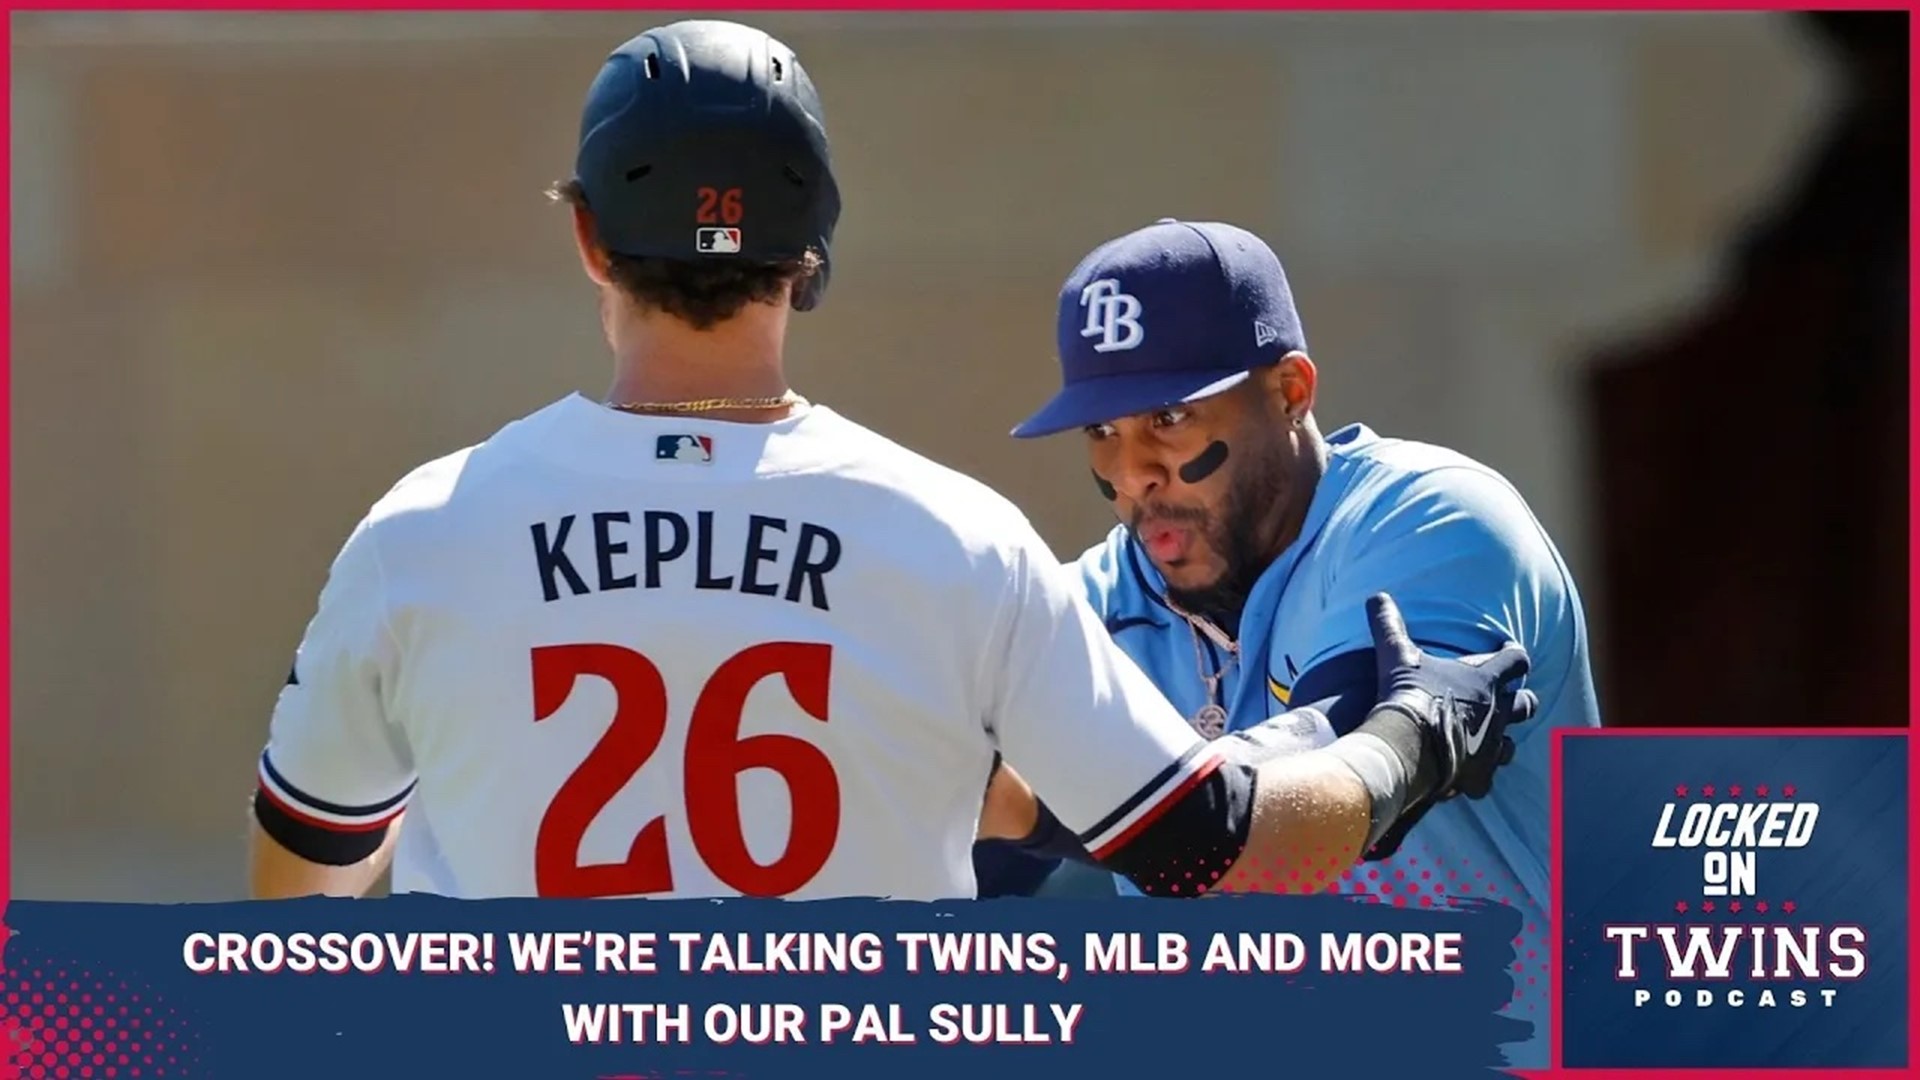 In this Locked On Twins/Locked On MLB crossover, Brandon joins Sully to chat about the MLB and, of course, the Twins as they inch closer and closer to an AL crown.